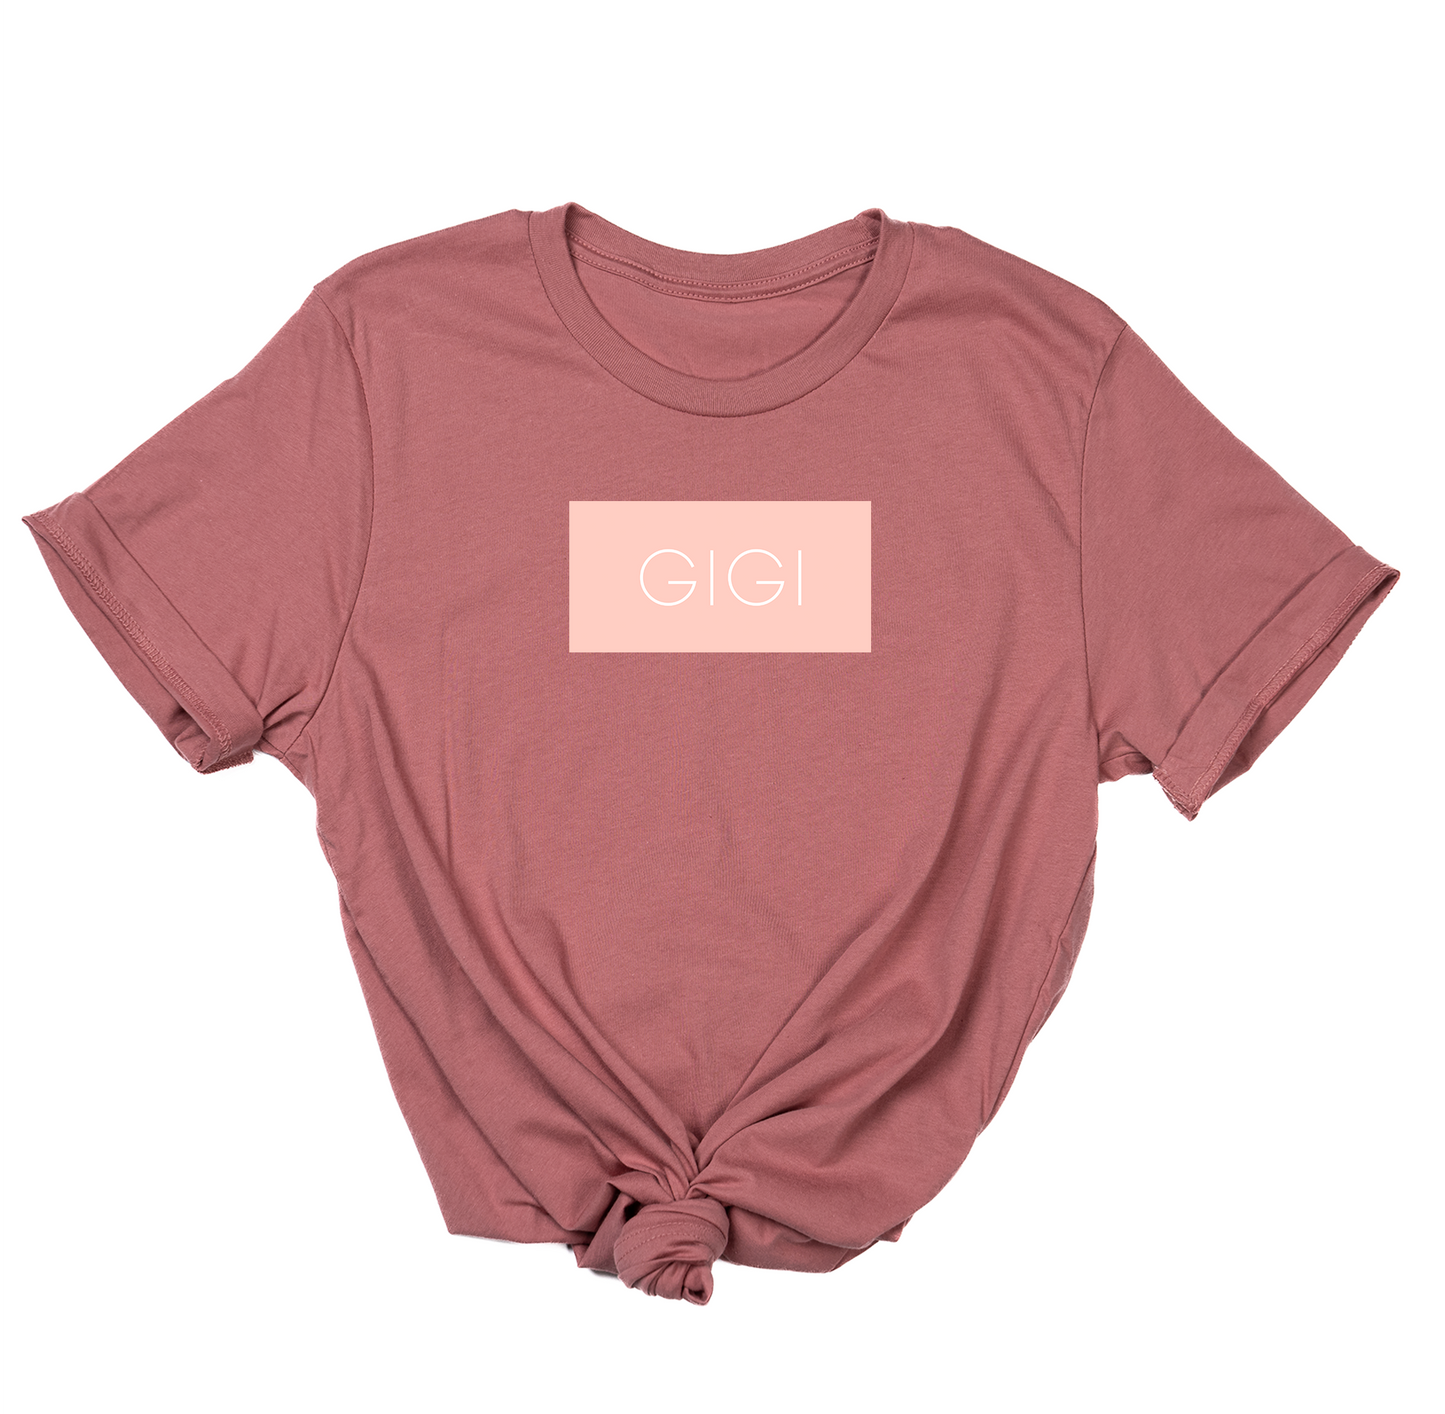 Gigi (Boxed Collection, Ballerina Pink Box/White Text, Across Front) - Tee (Mauve)